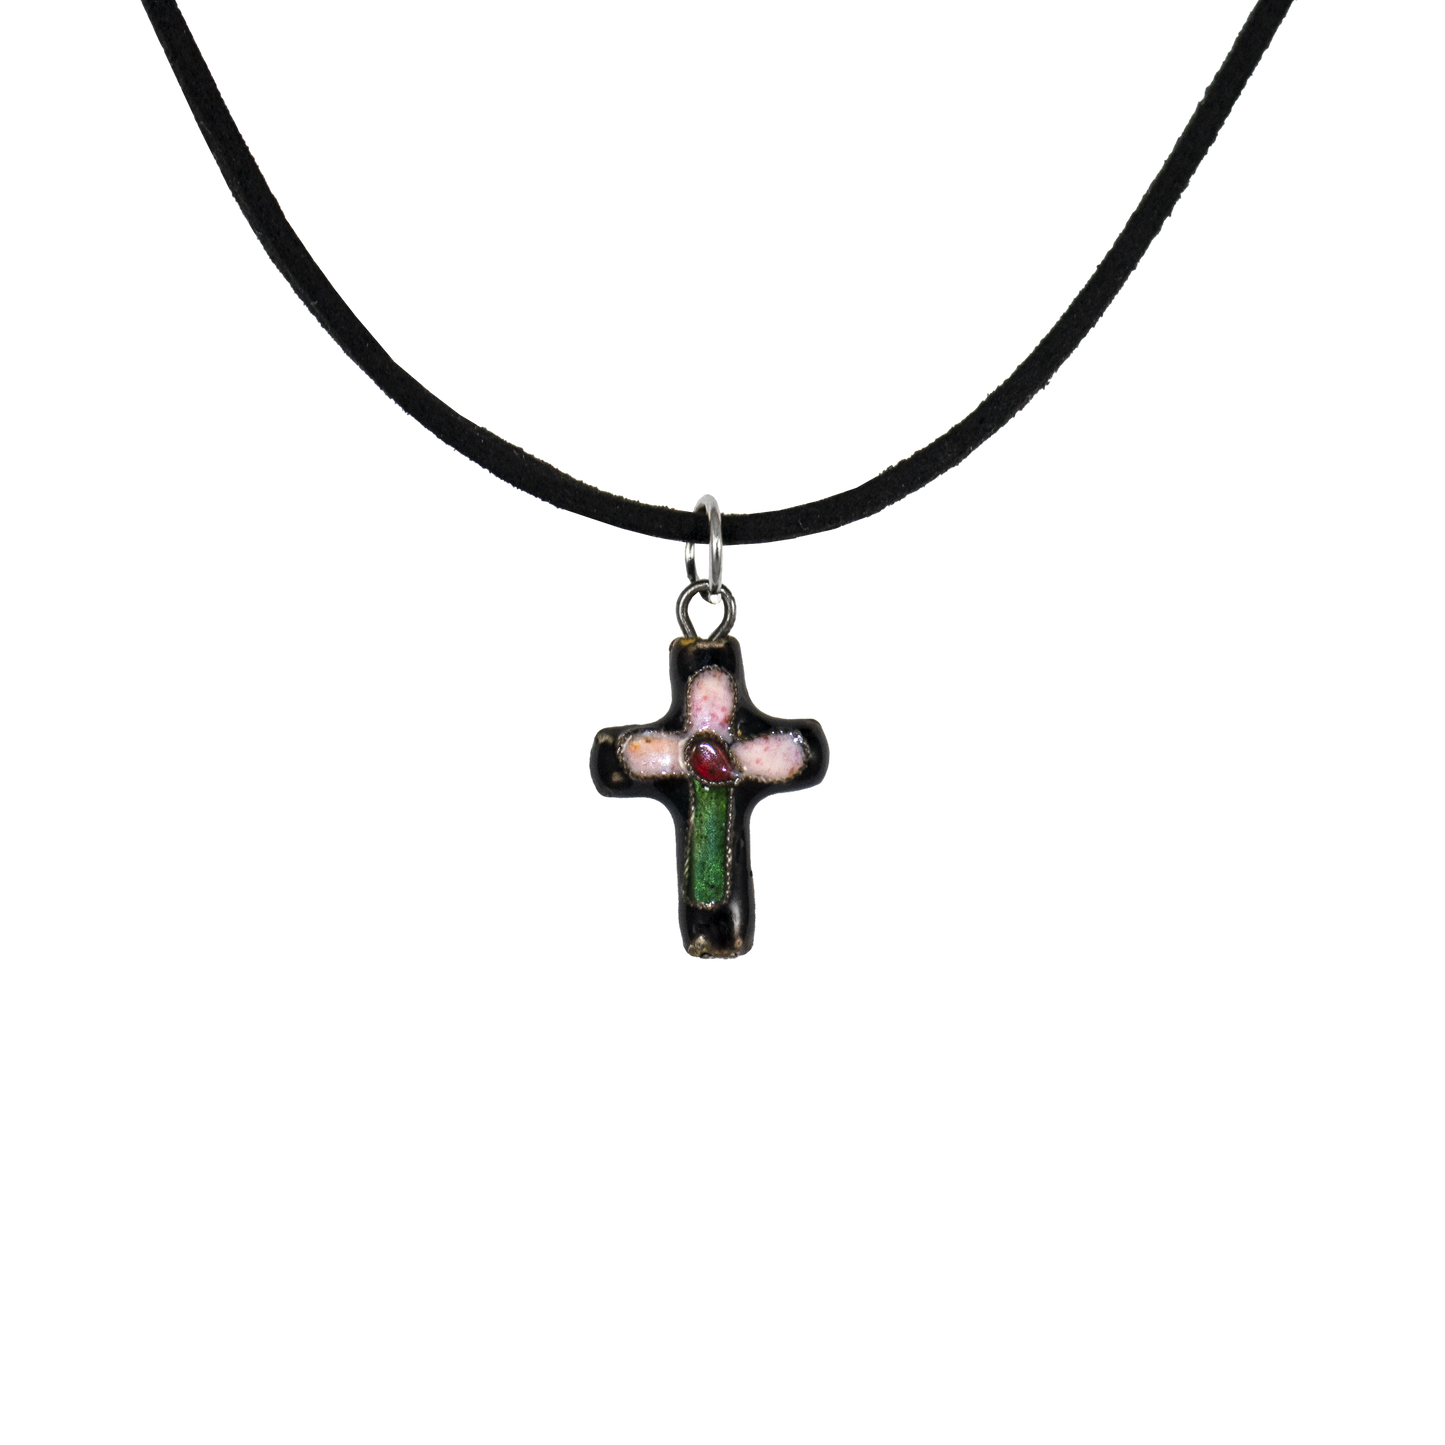 Black Cross Pendant with Pink Petal like coloring on top portion and green Stem on the bottom and red center on a Suede Cord